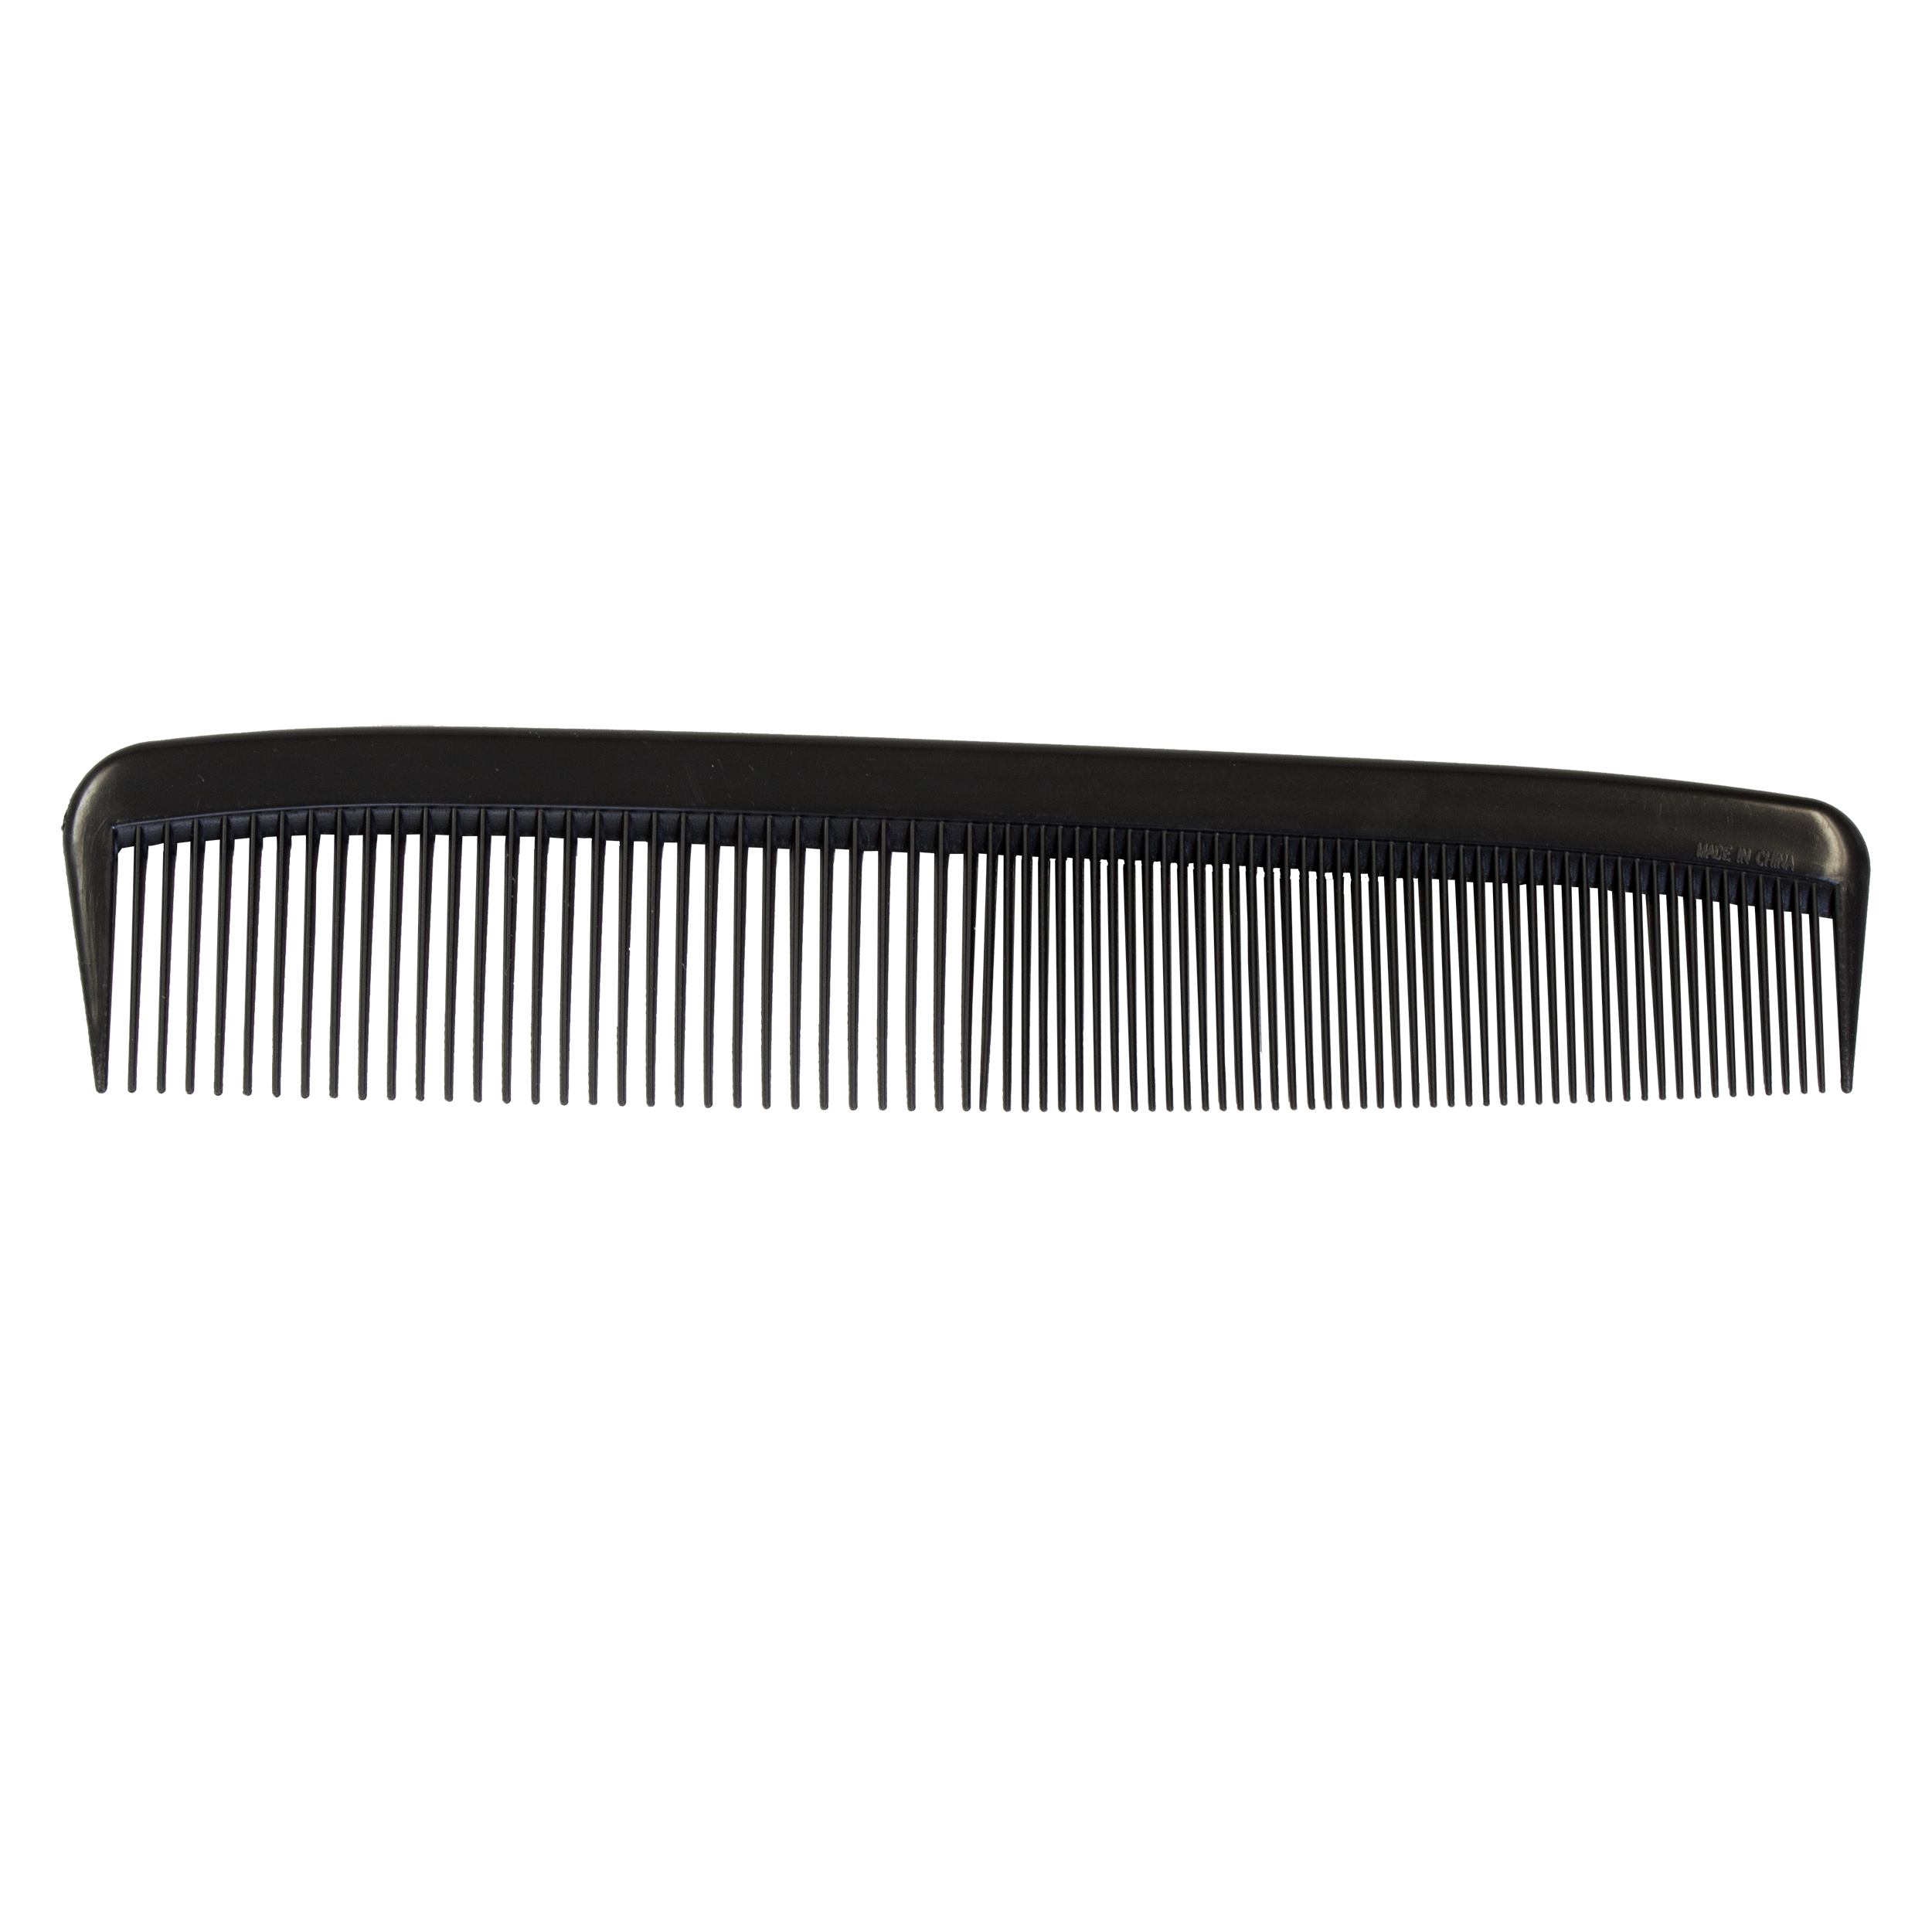 Adult Combs 9in - Black